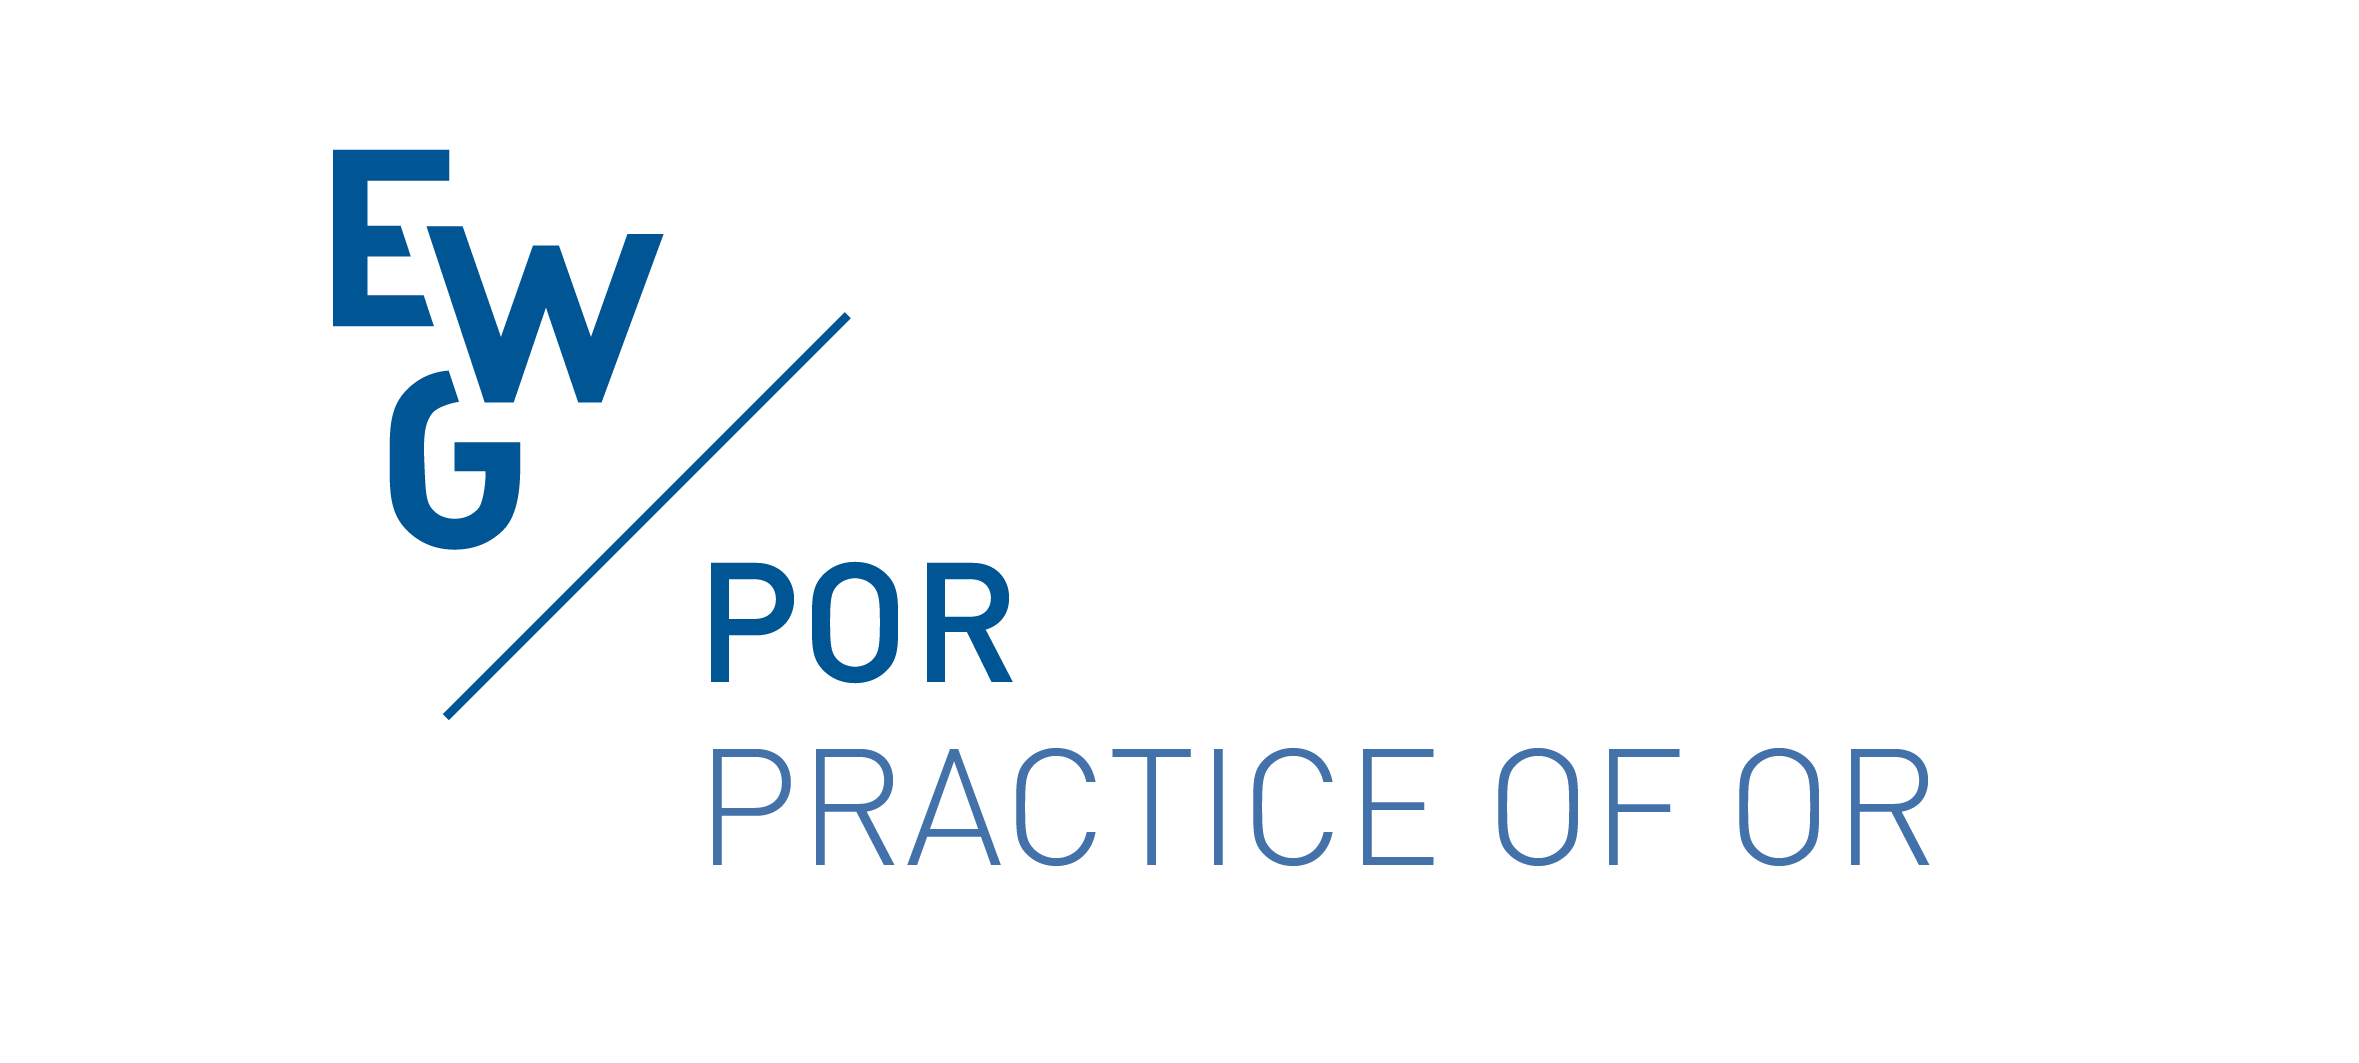 EURO working group on Practice of OR (POR)